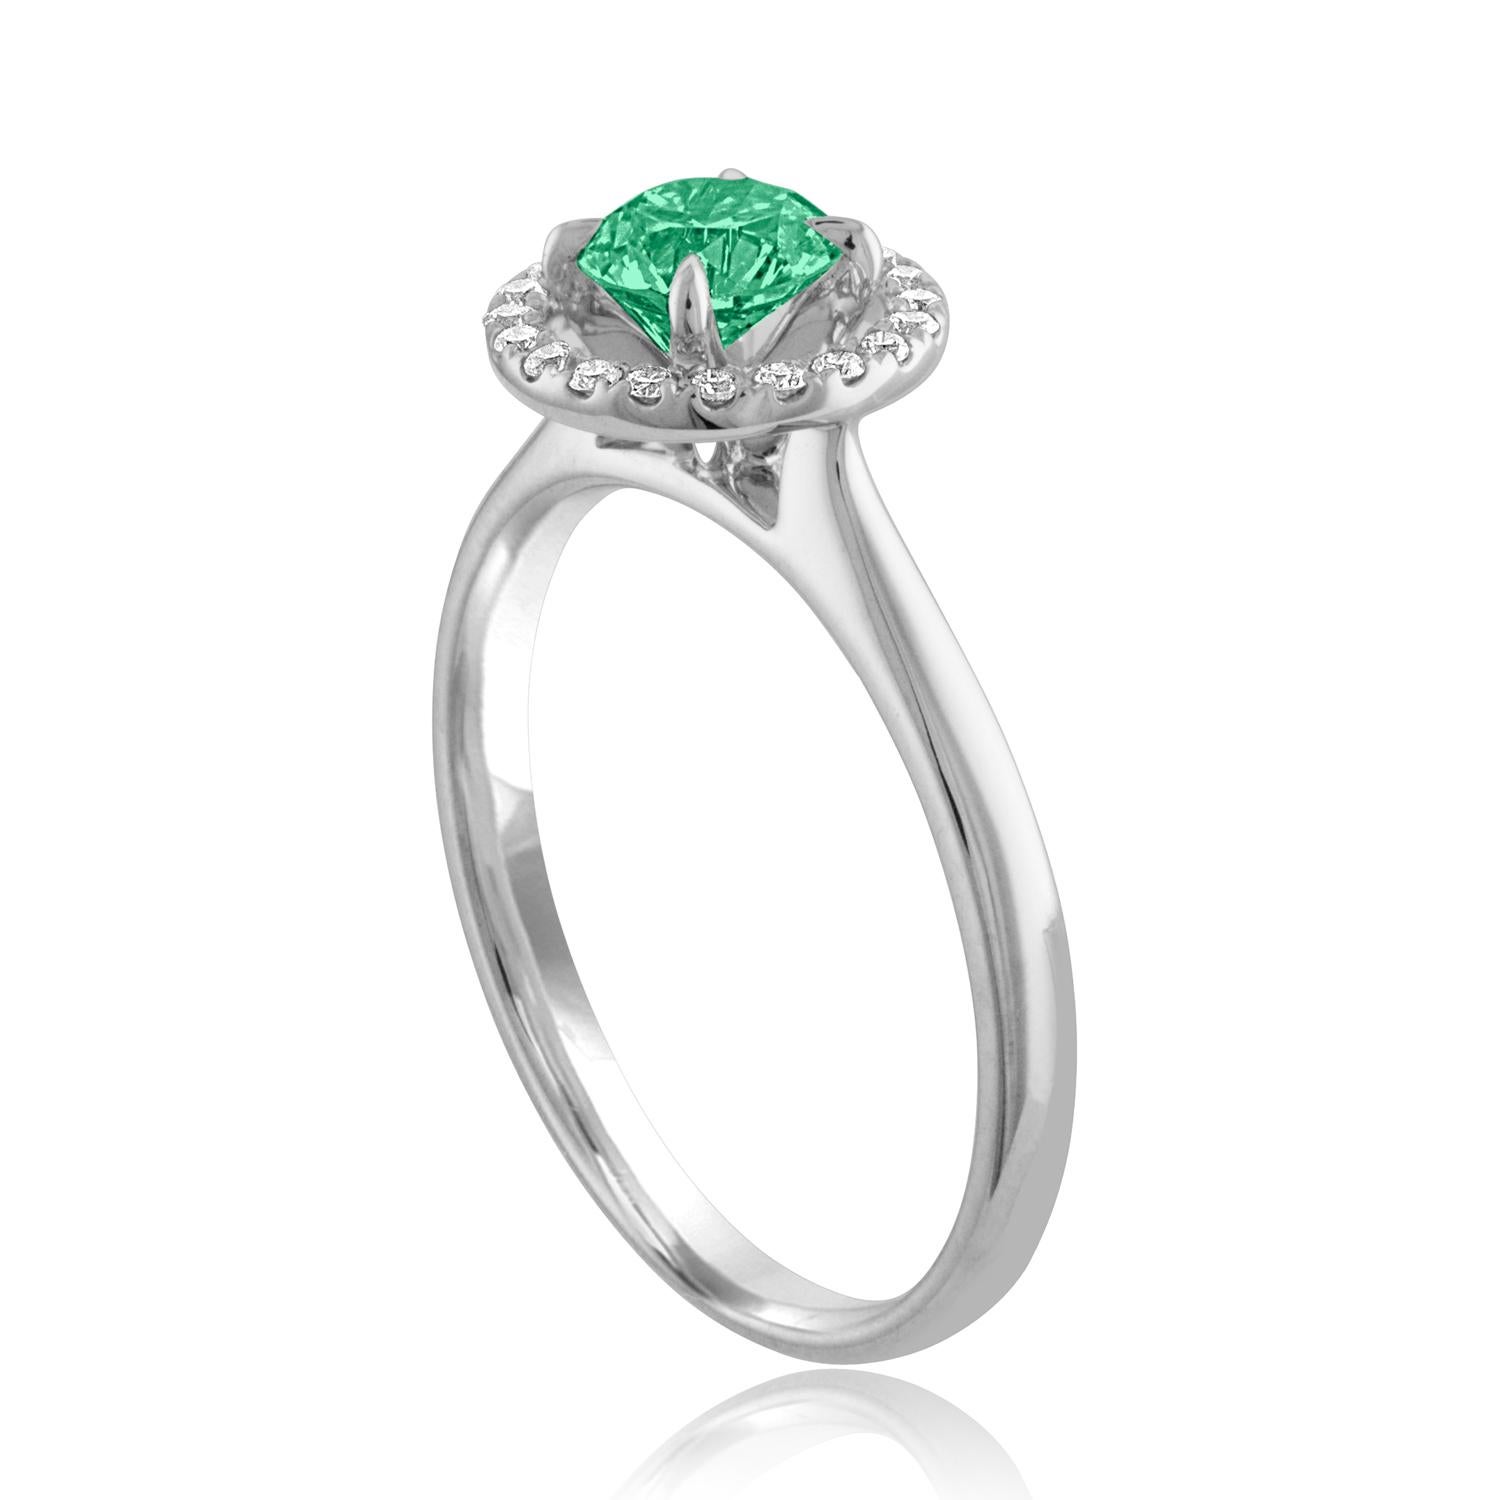 Beautiful Diamond & Emerald Halo Ring
The ring is 18K White Gold.
There are 0.15 Carats in Diamonds F/G VS/SI
The Center is Round 0.42 Carat Emerald.
The Emerald is AGL certified.
The ring is a size 7.00, sizable.
The ring weighs 2.9 grams.